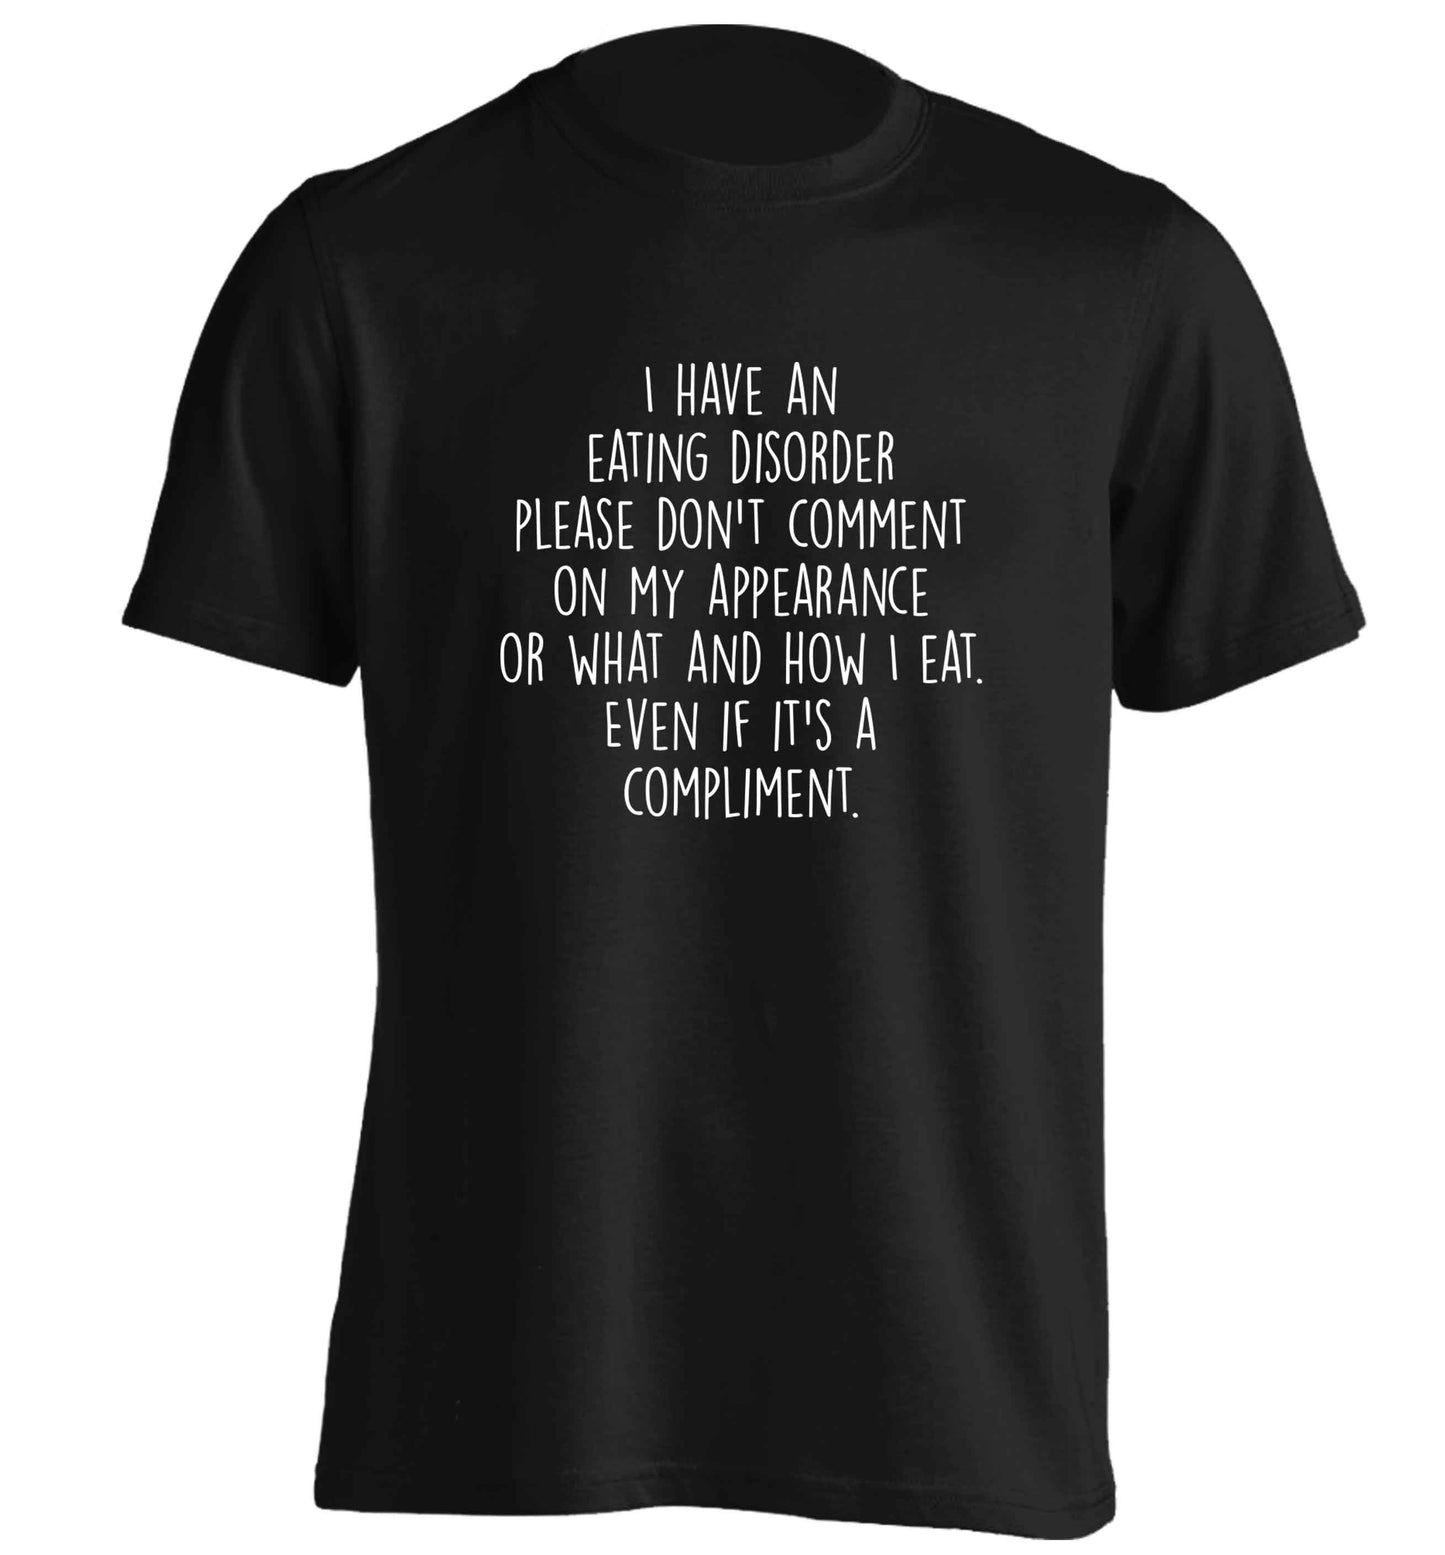 I have an eating disorder please don't comment on my appearance or what and how I eat. Even if it's a compliment adults unisex black Tshirt 2XL